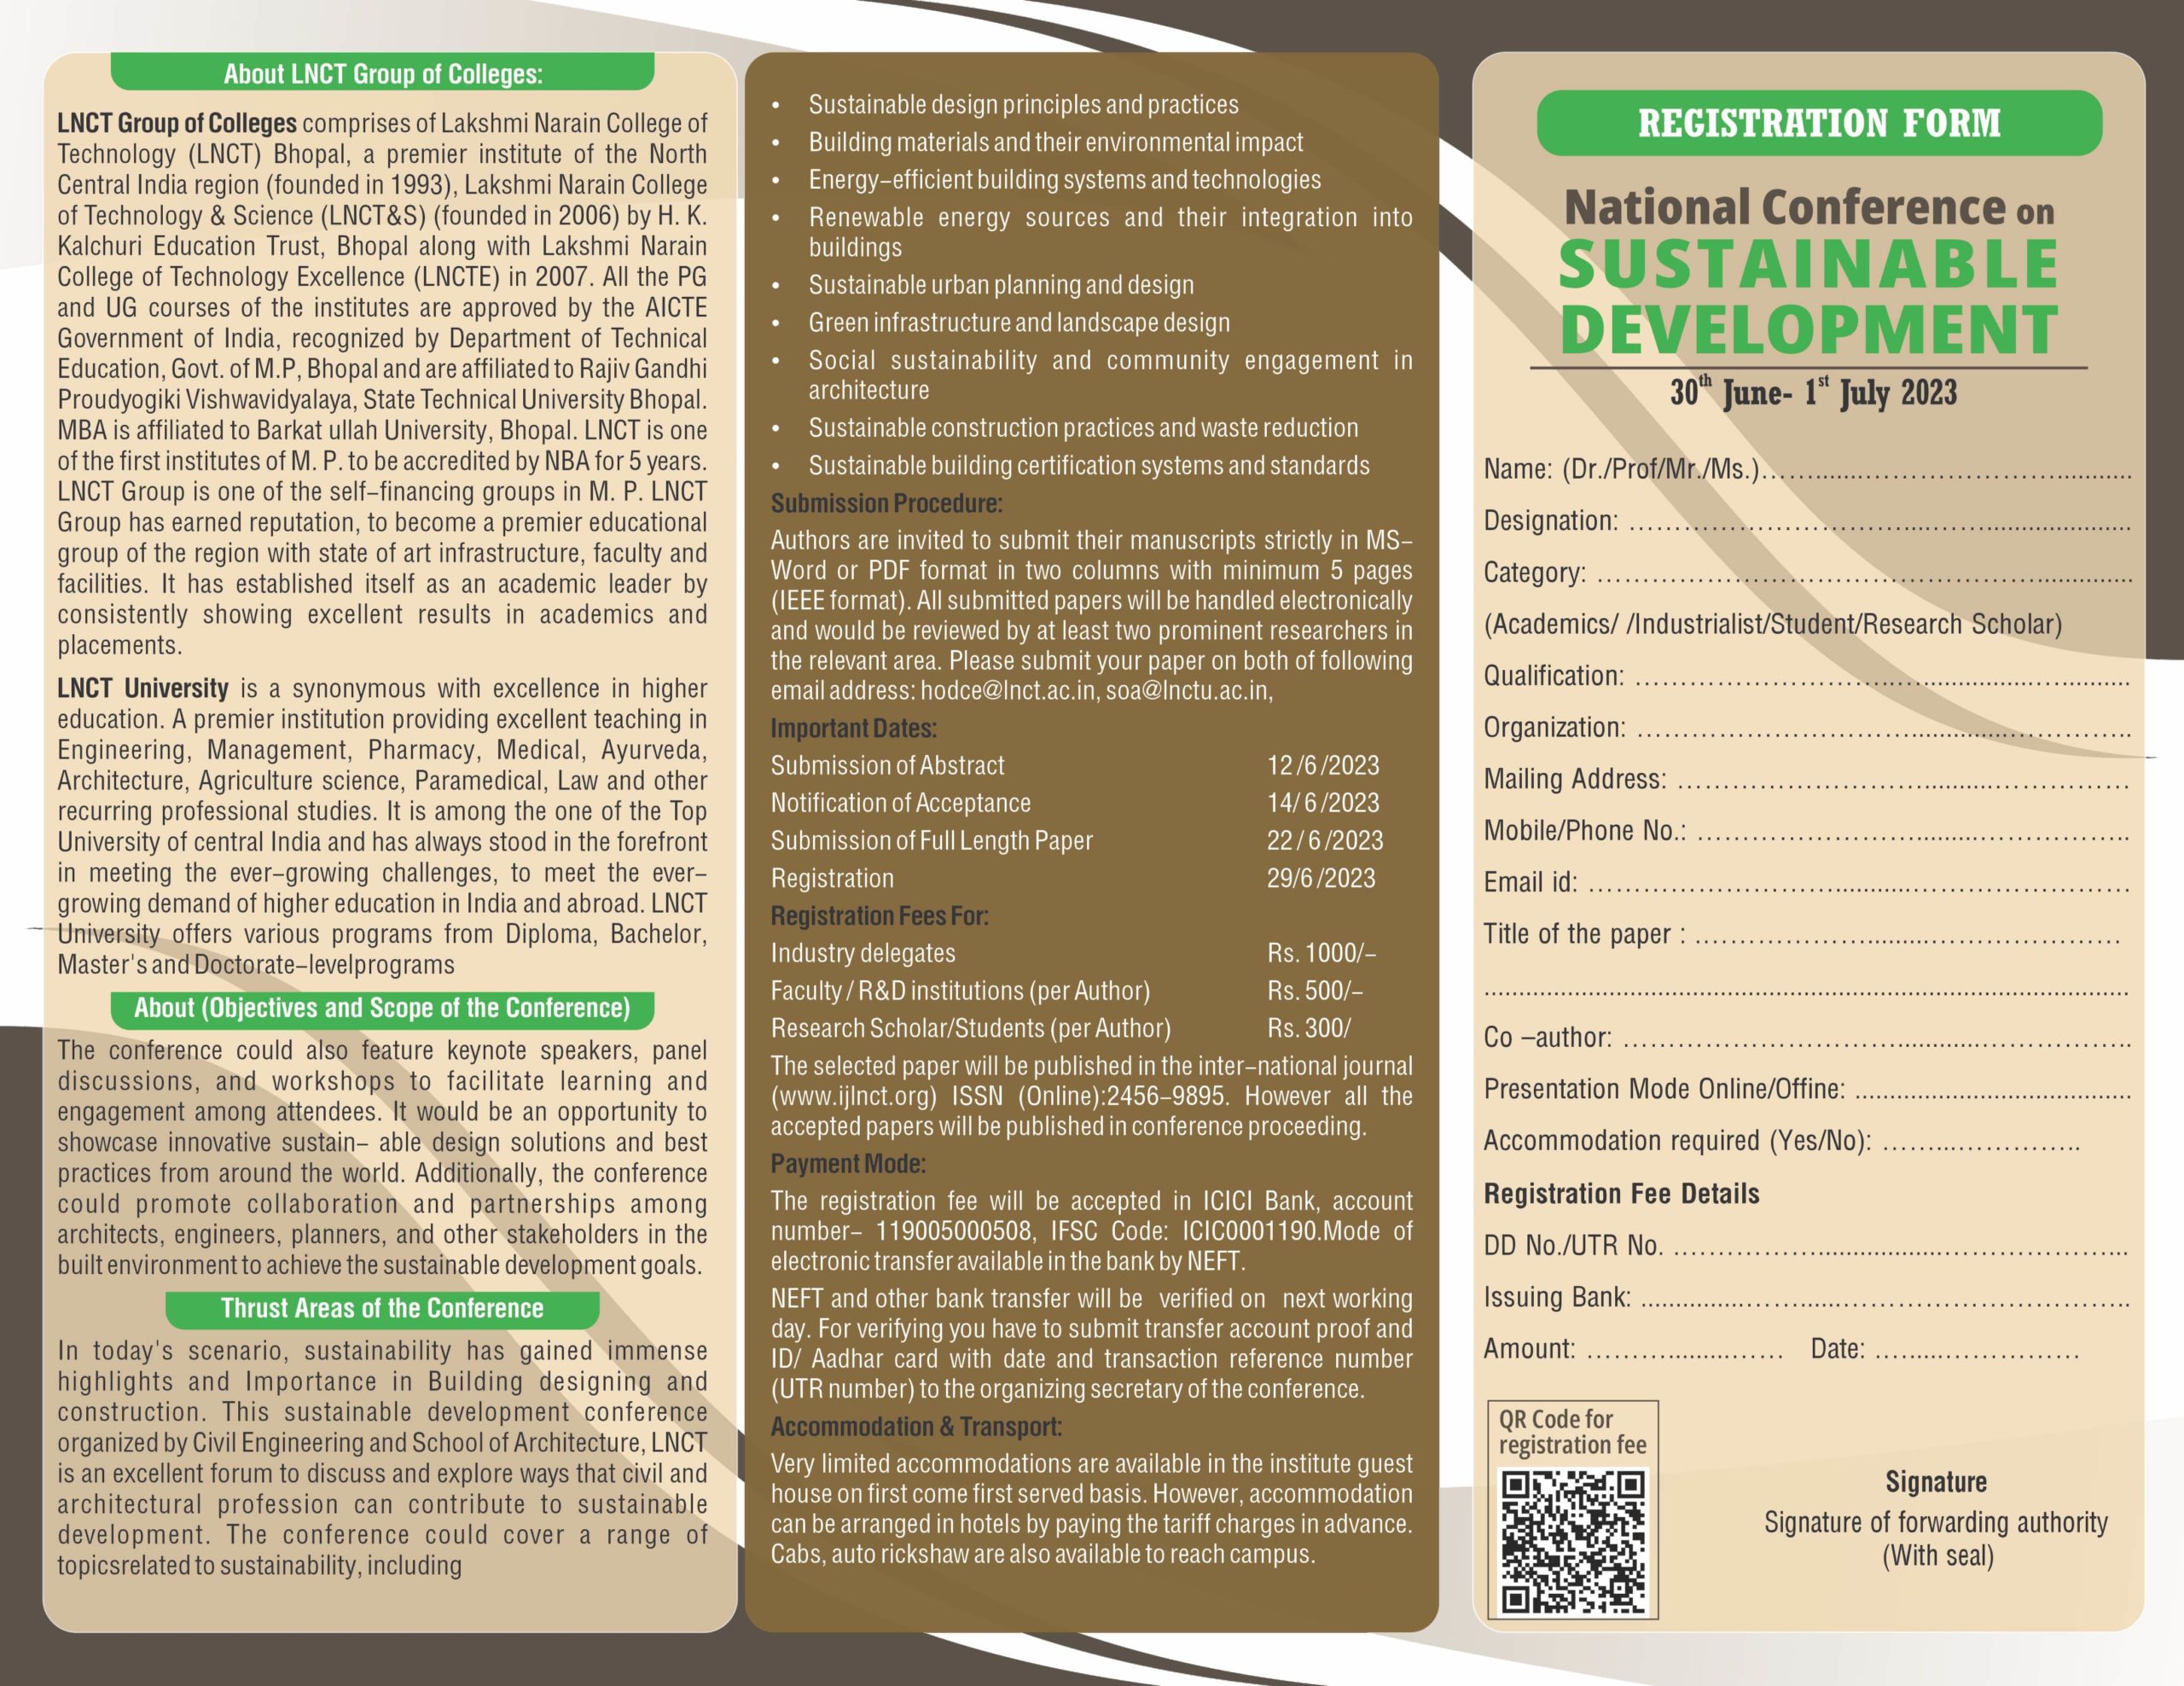 National Conference on Sustainable Development 1